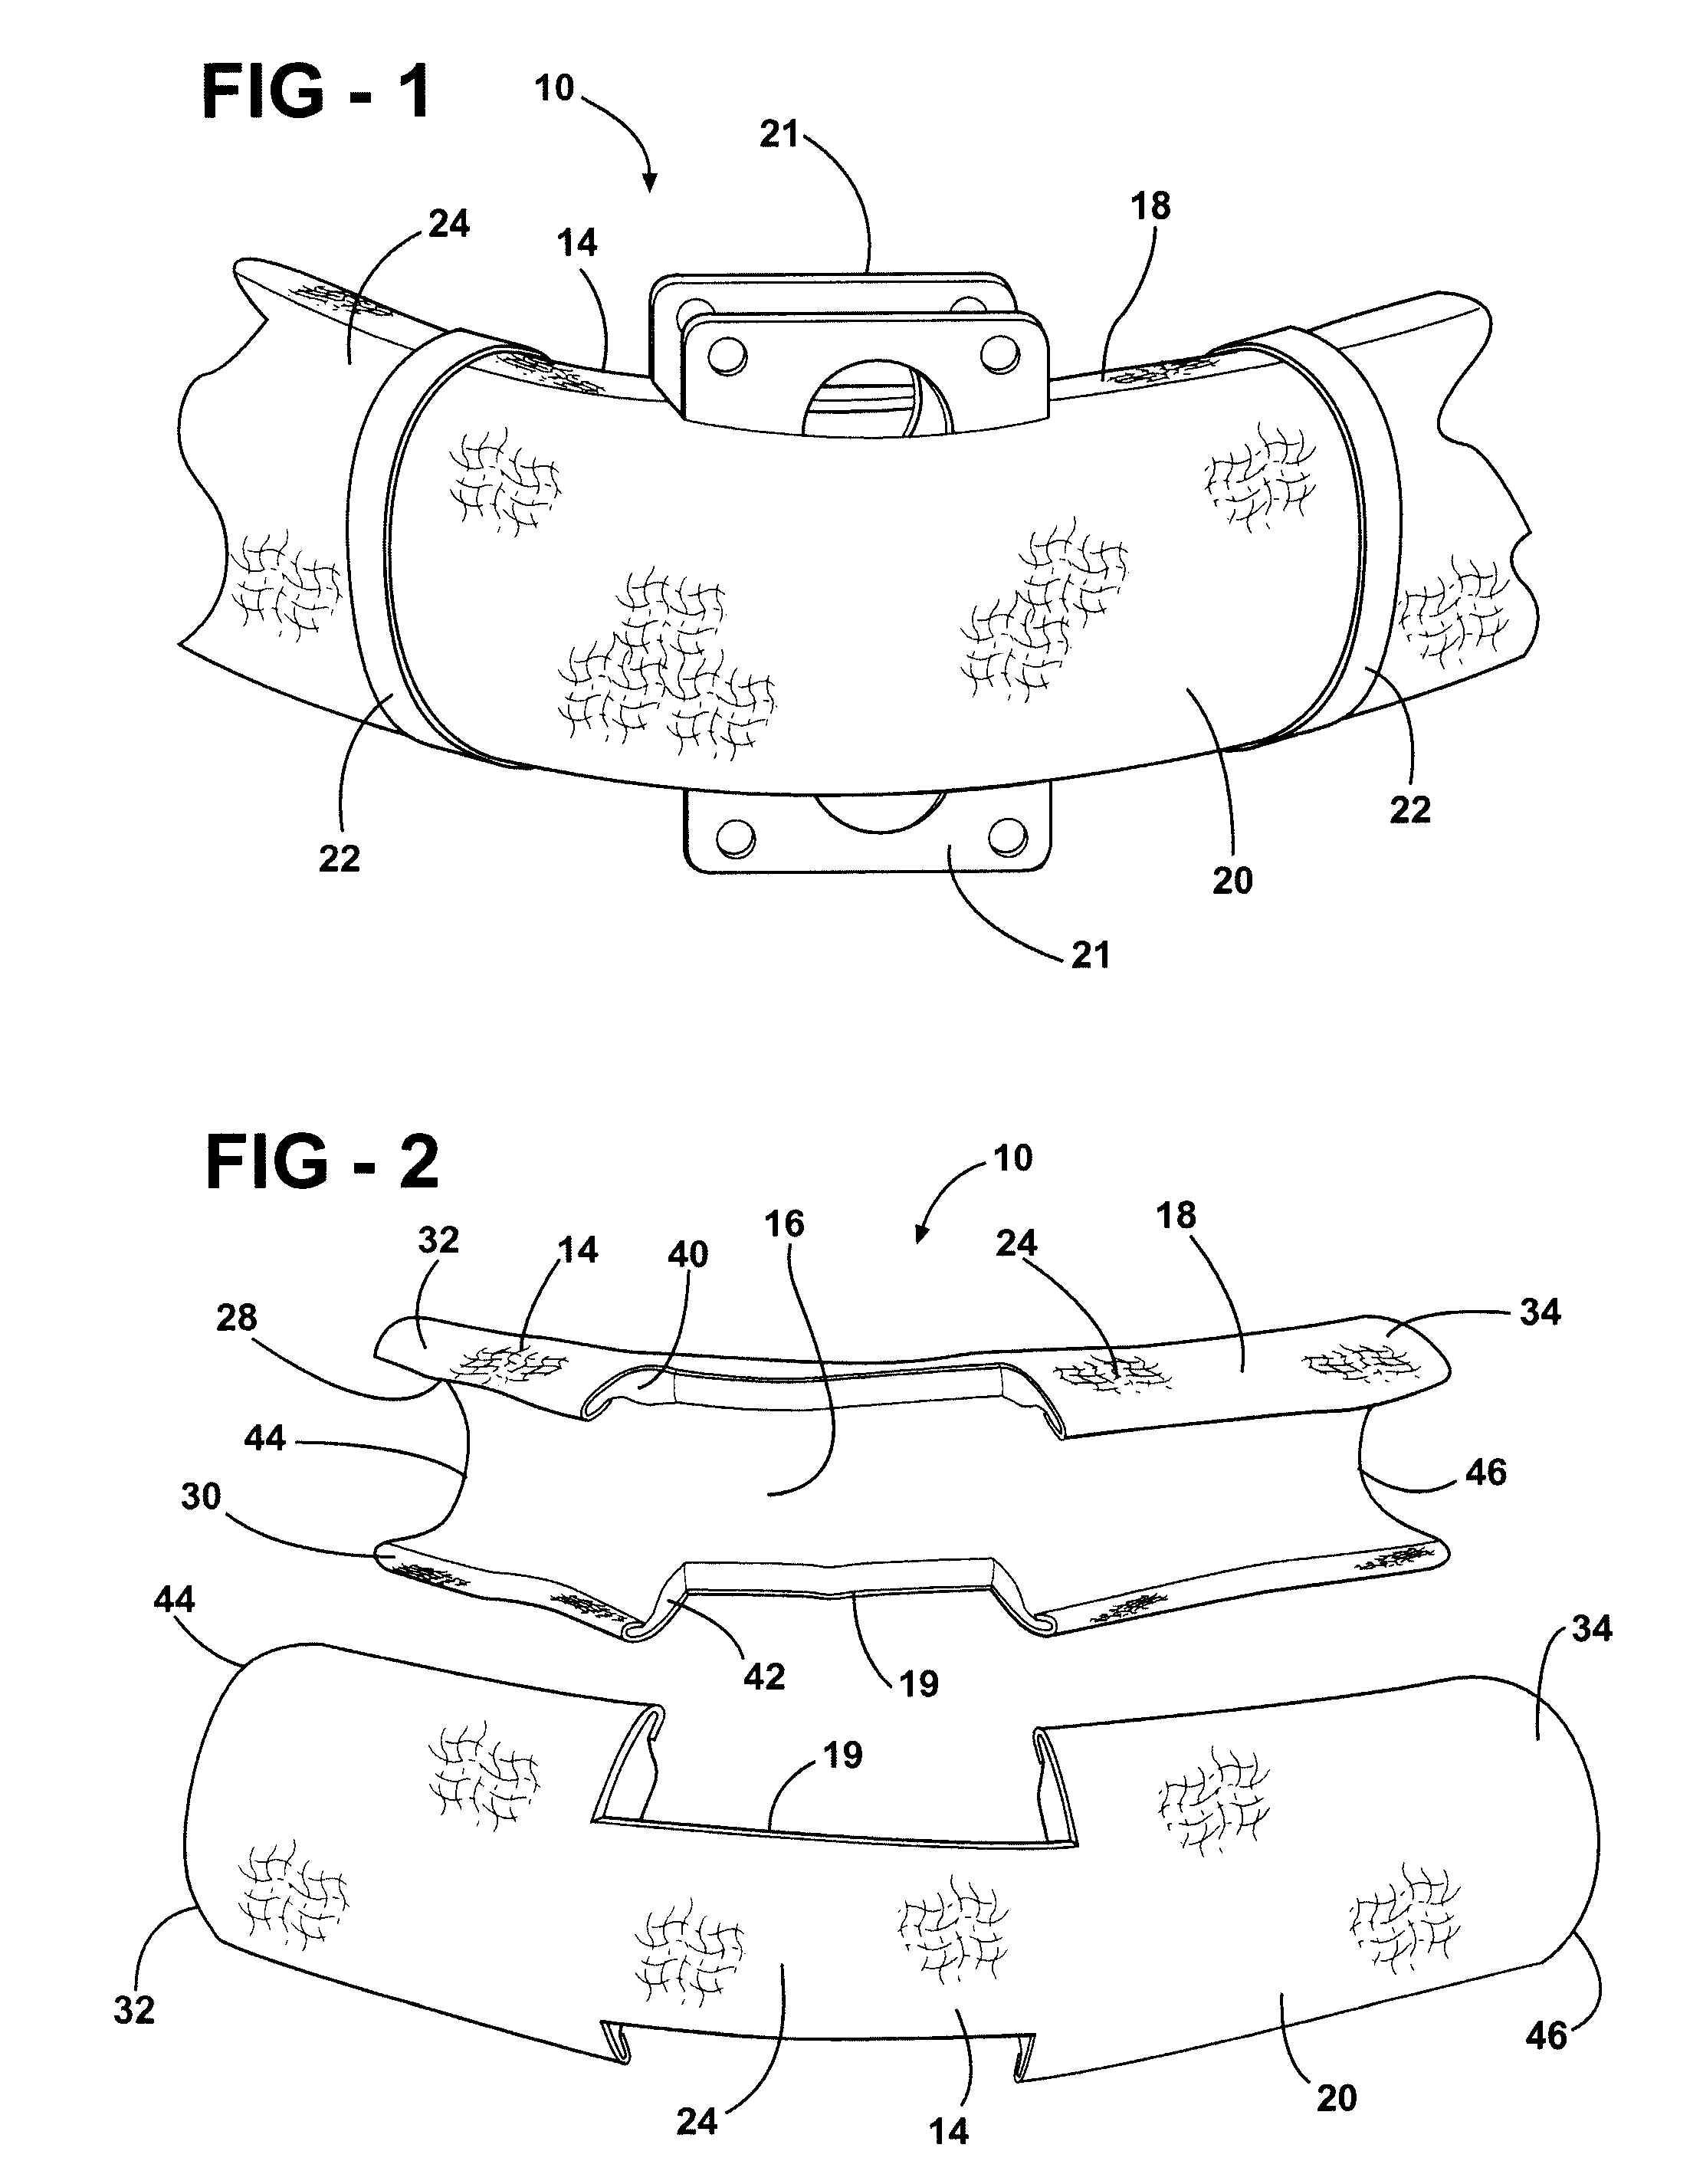 Thermal shield and methods of construction and installation